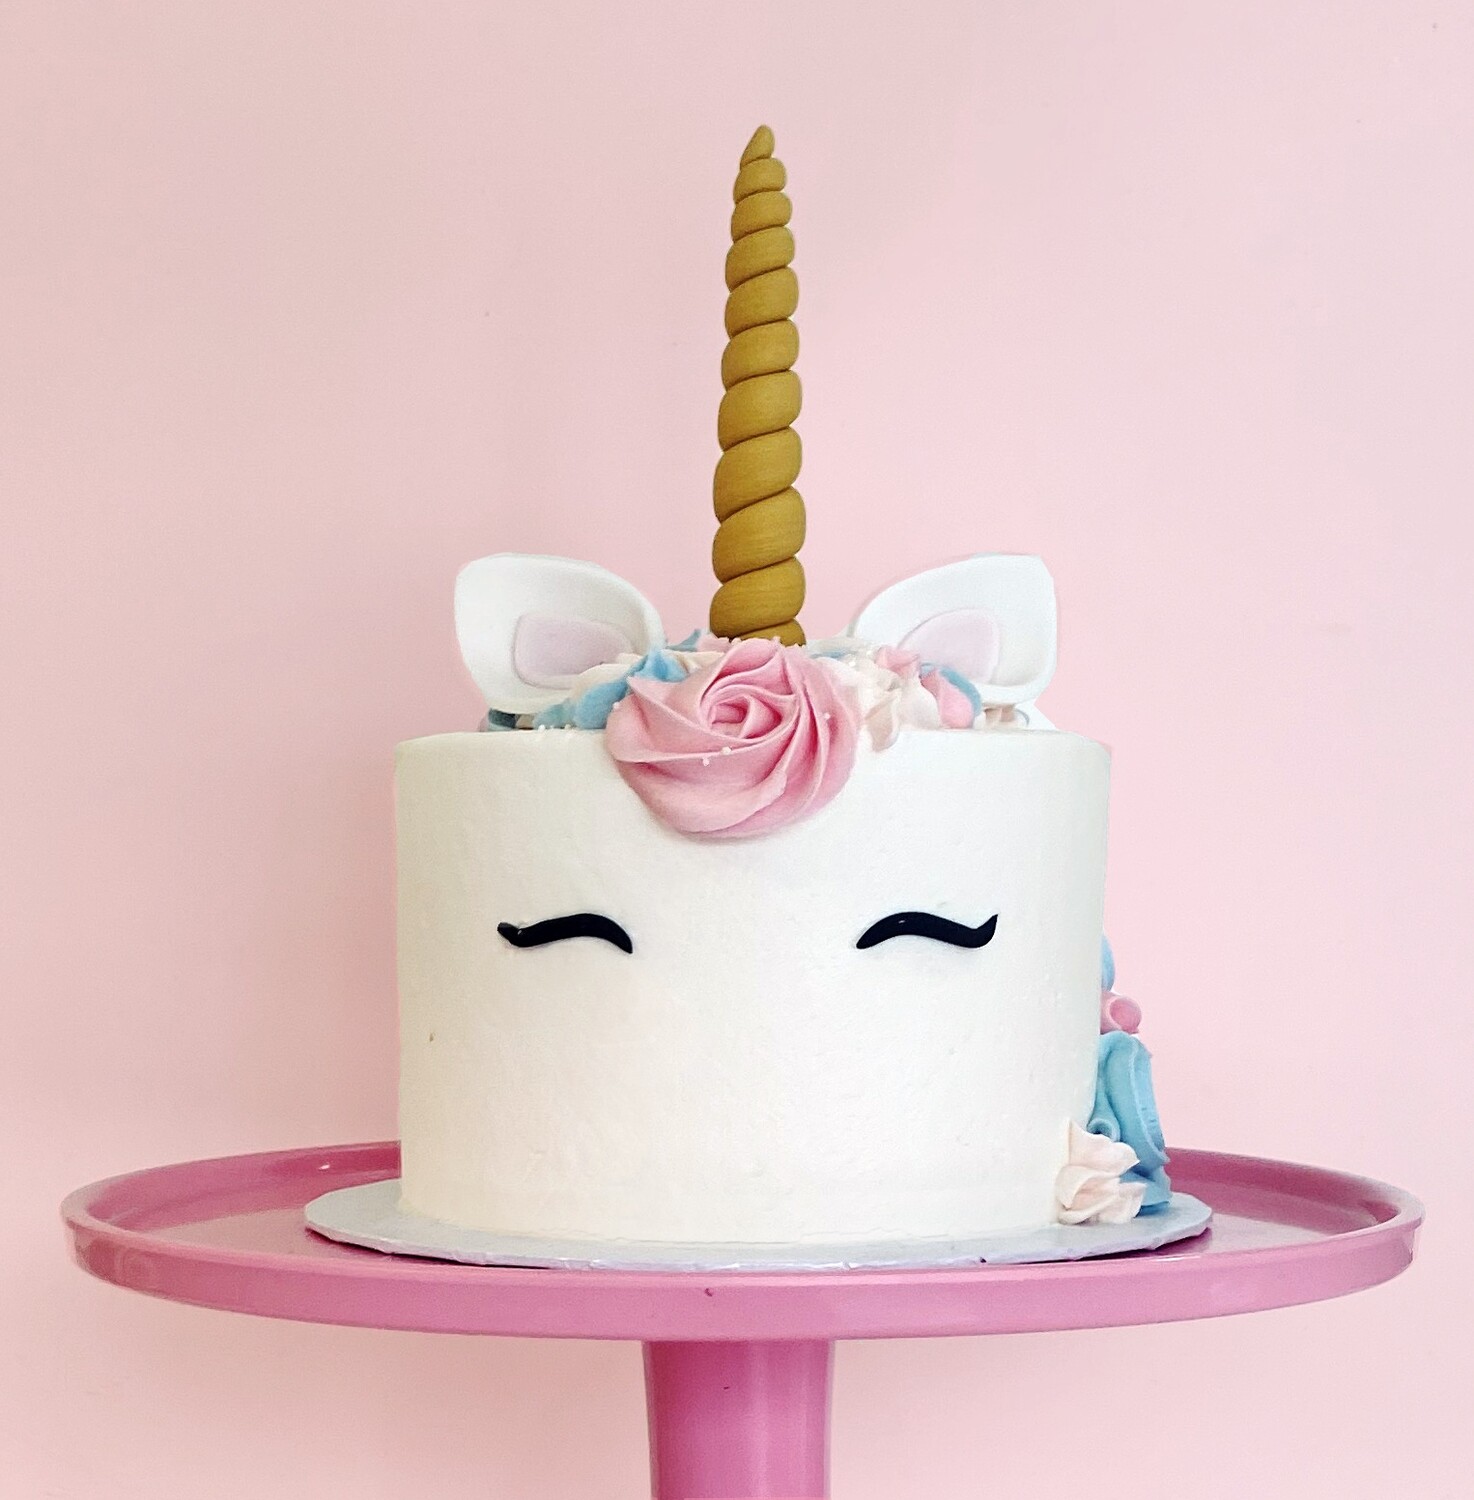 Cakes - Unicorn with fondant details | Shop Get Caked Bakery Online